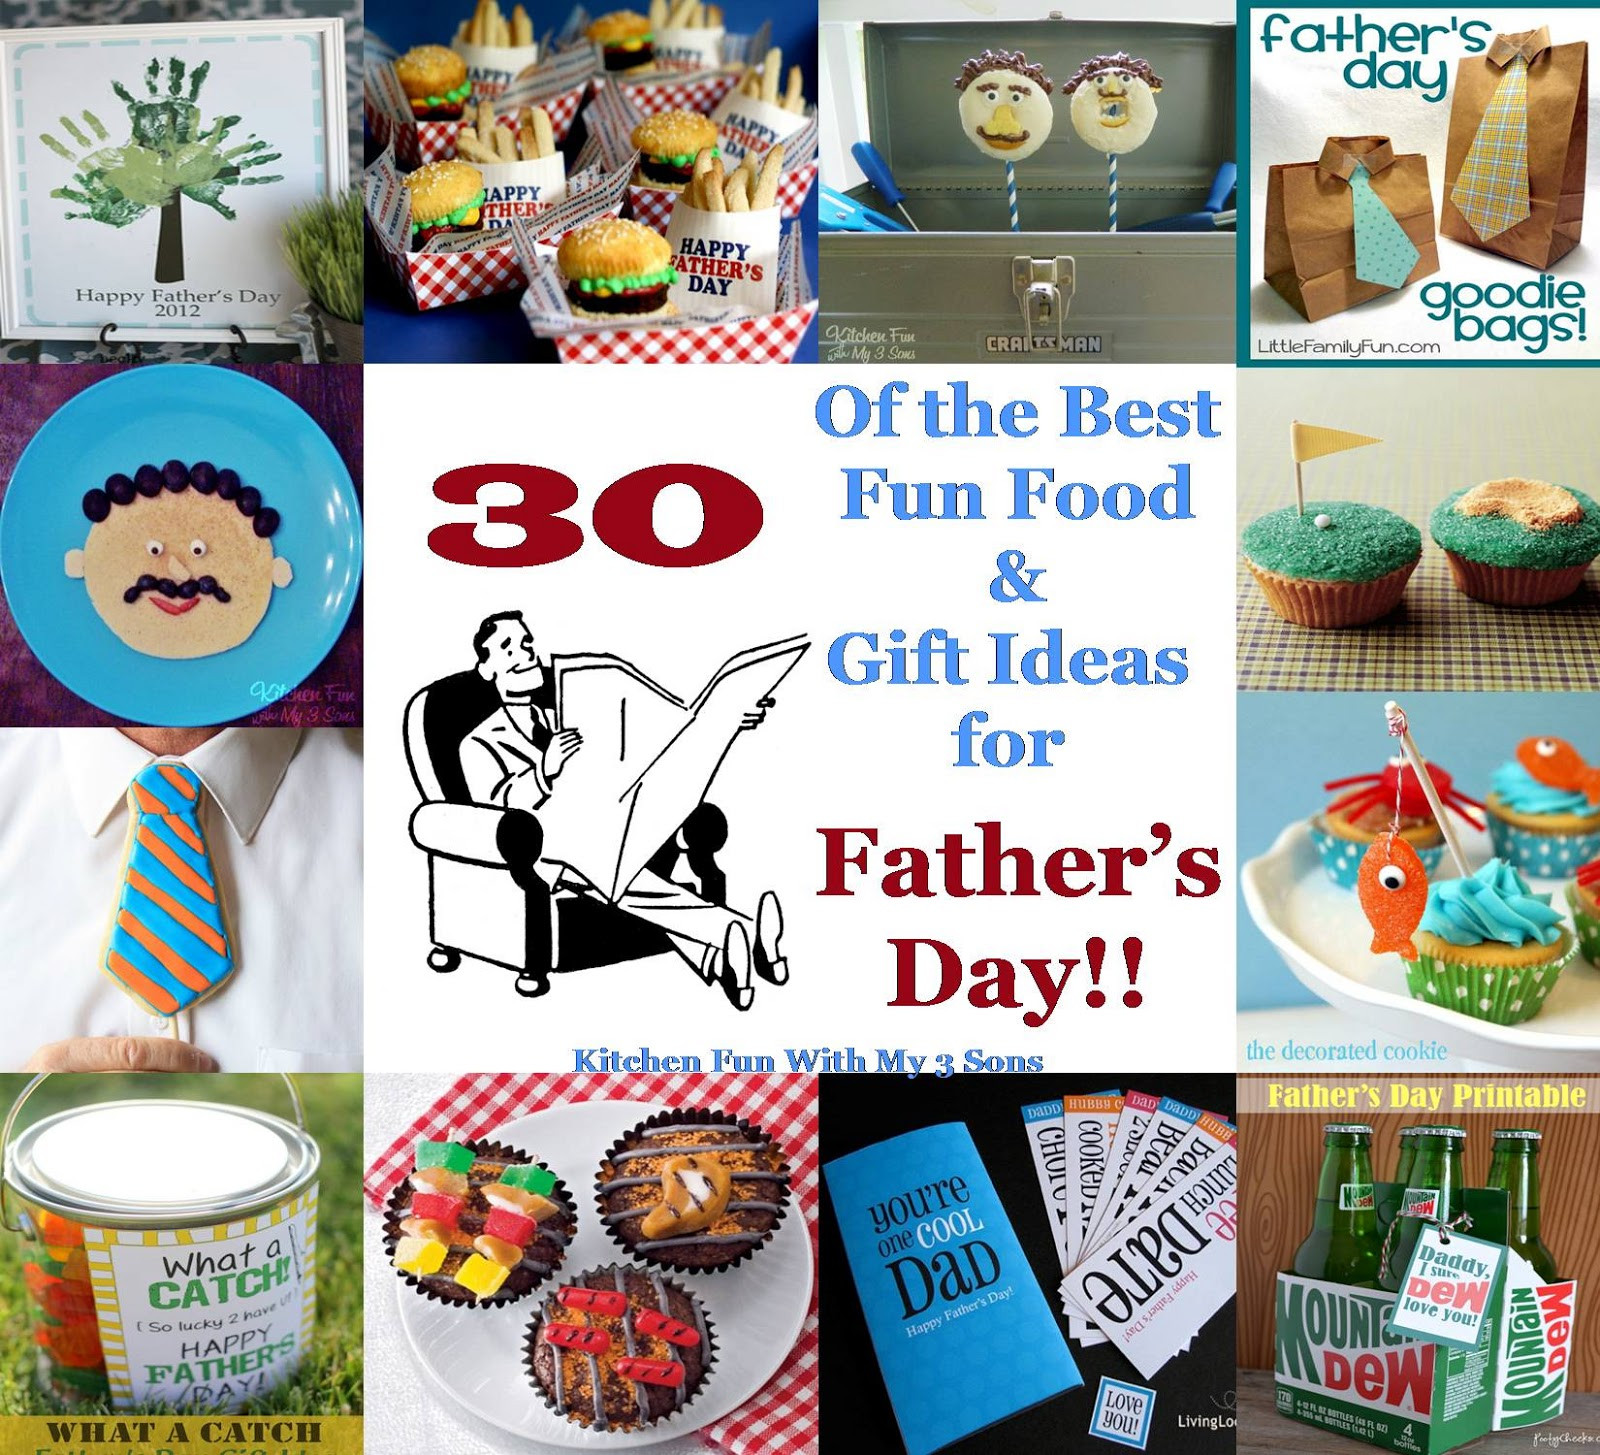 Father And Son Gift Ideas
 30 of the Best Fun Food & Gift Ideas for Father s Day